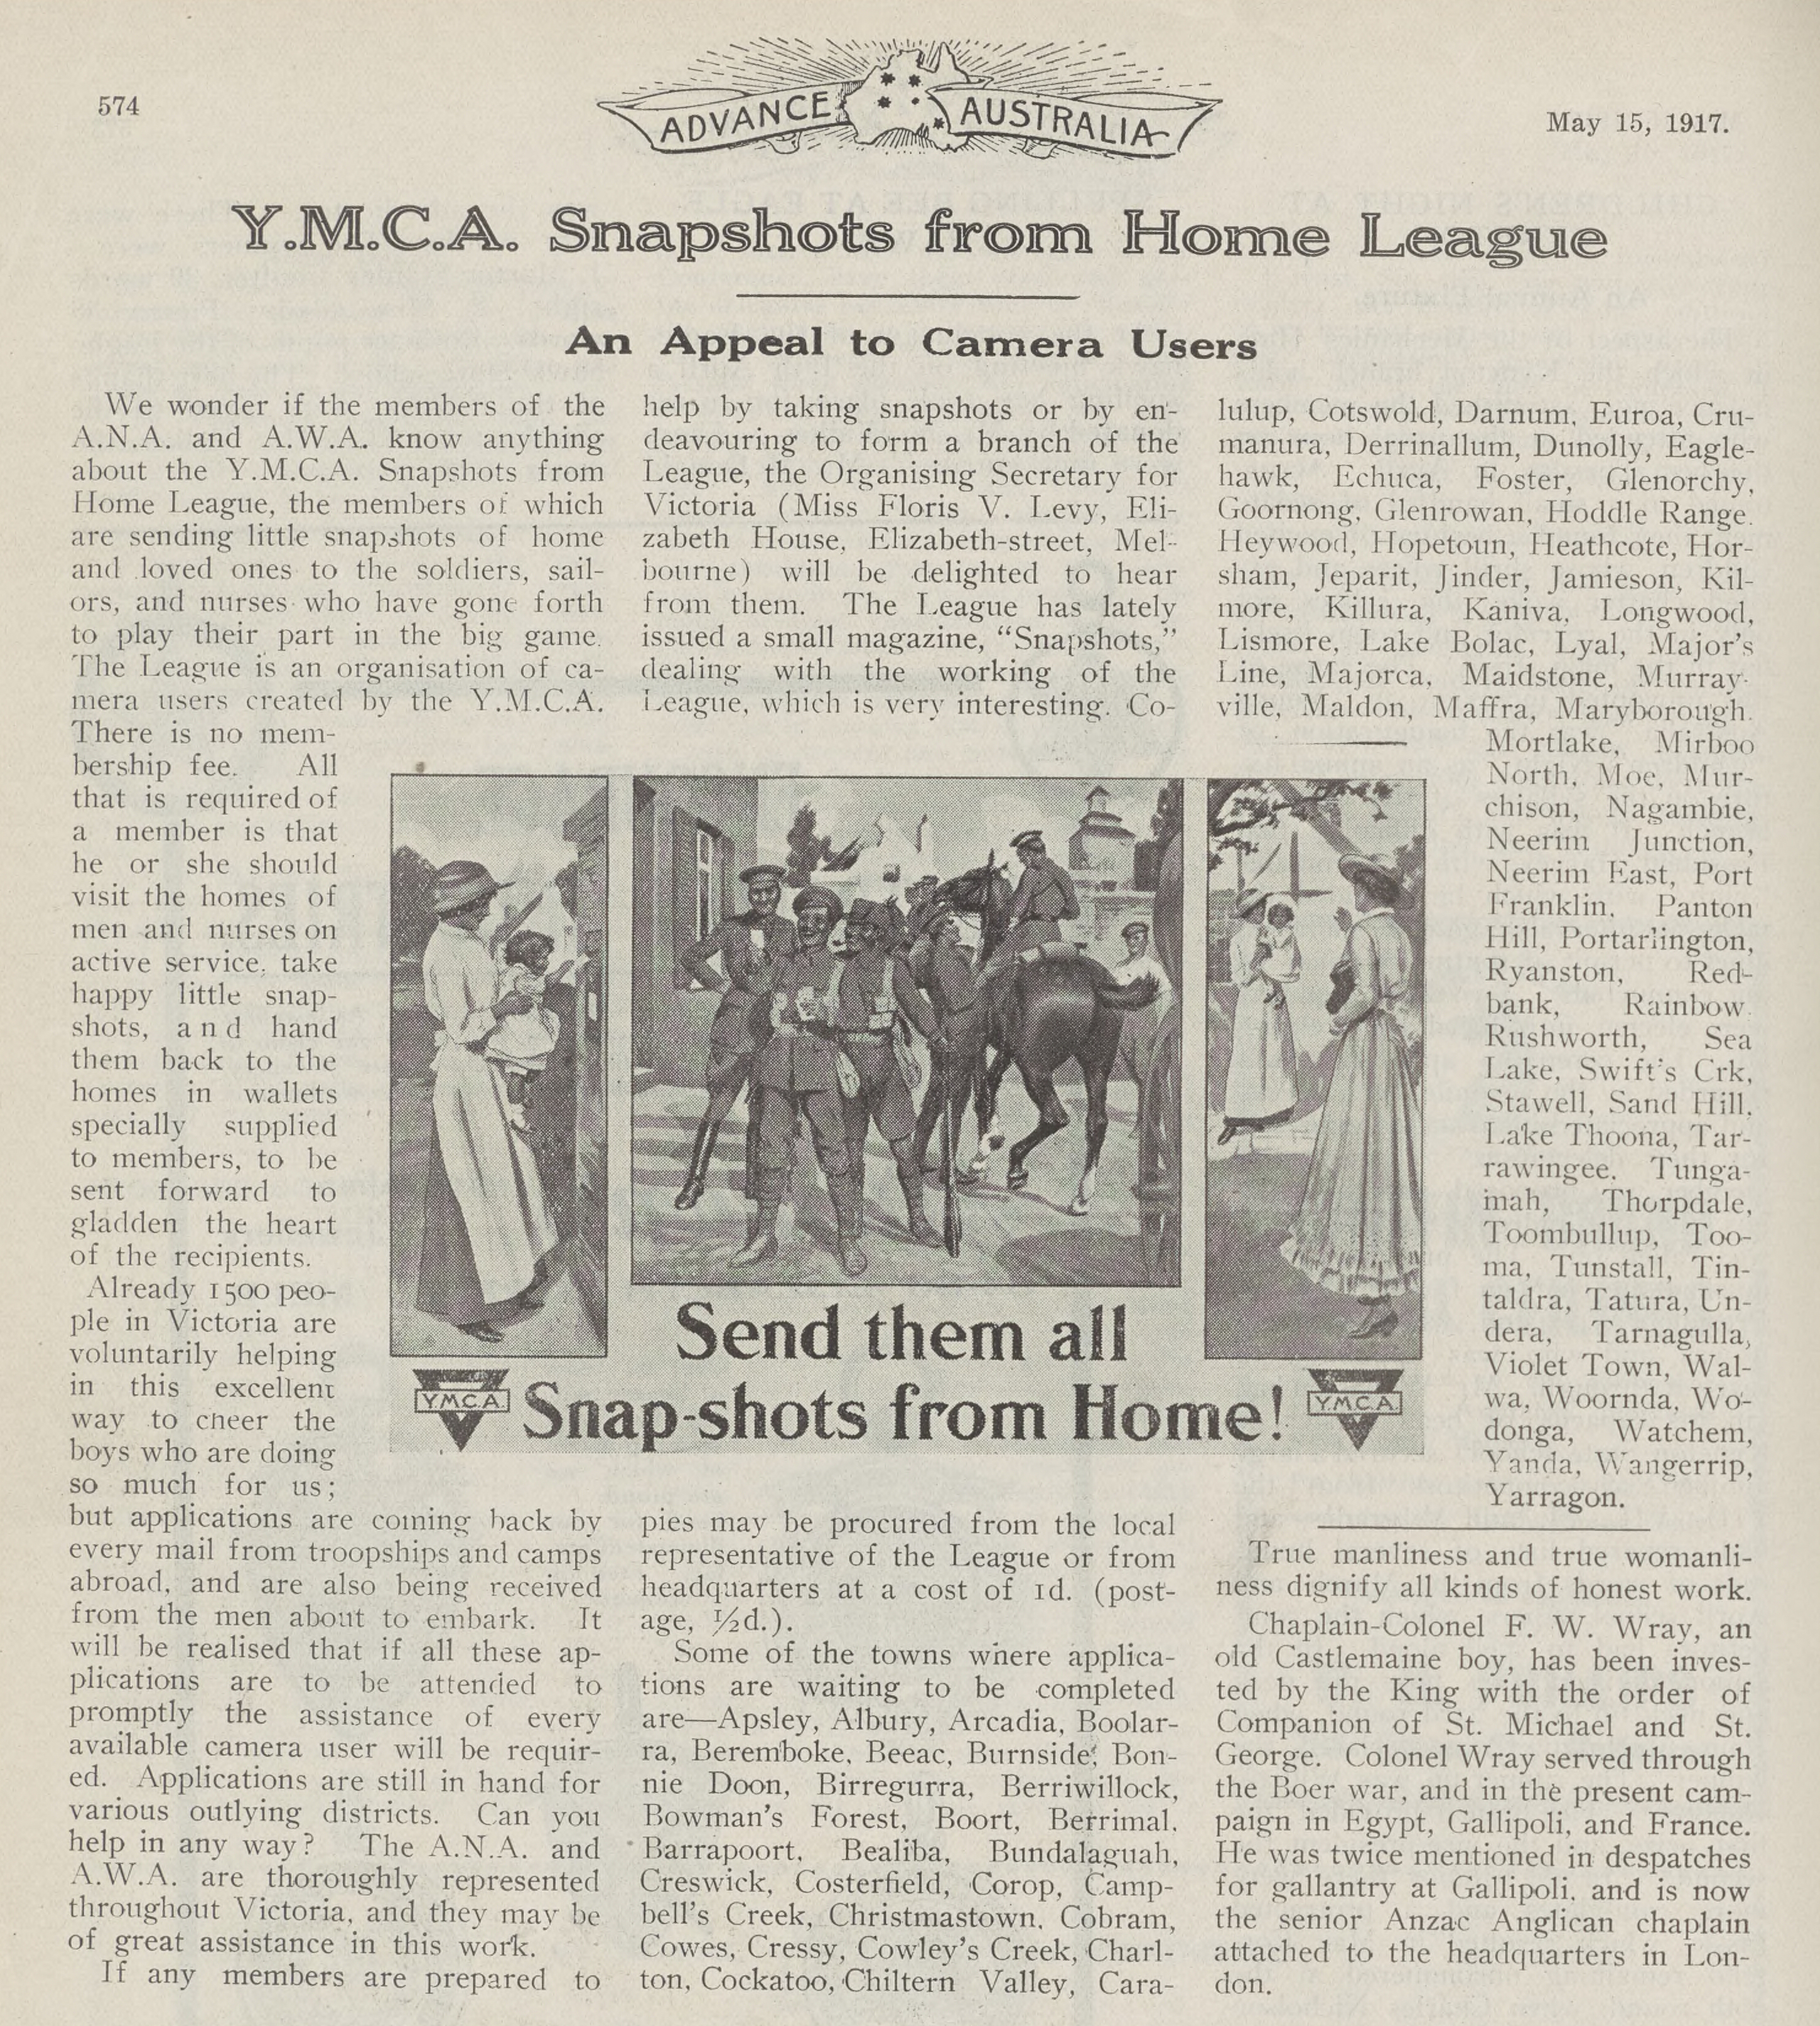 article and advertisement for Y.M.C.A Snapshots from Home League